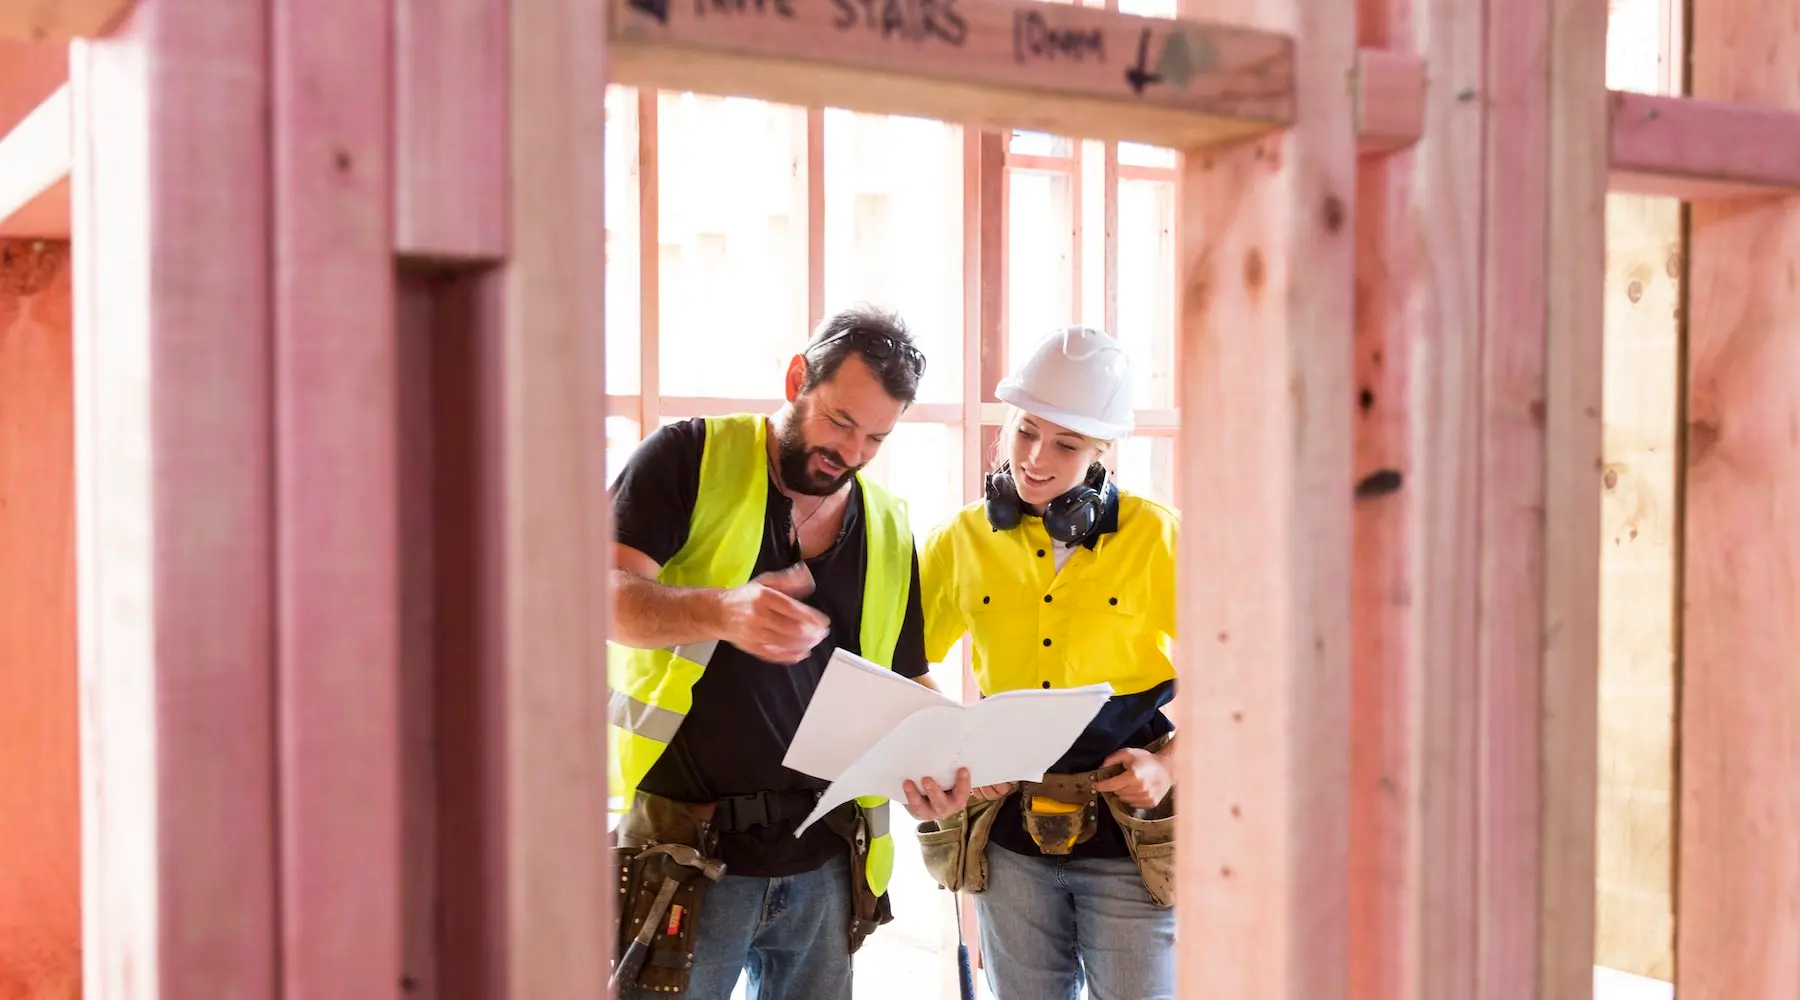 Two people in high-vis clothes looking at building plans on a construction site.